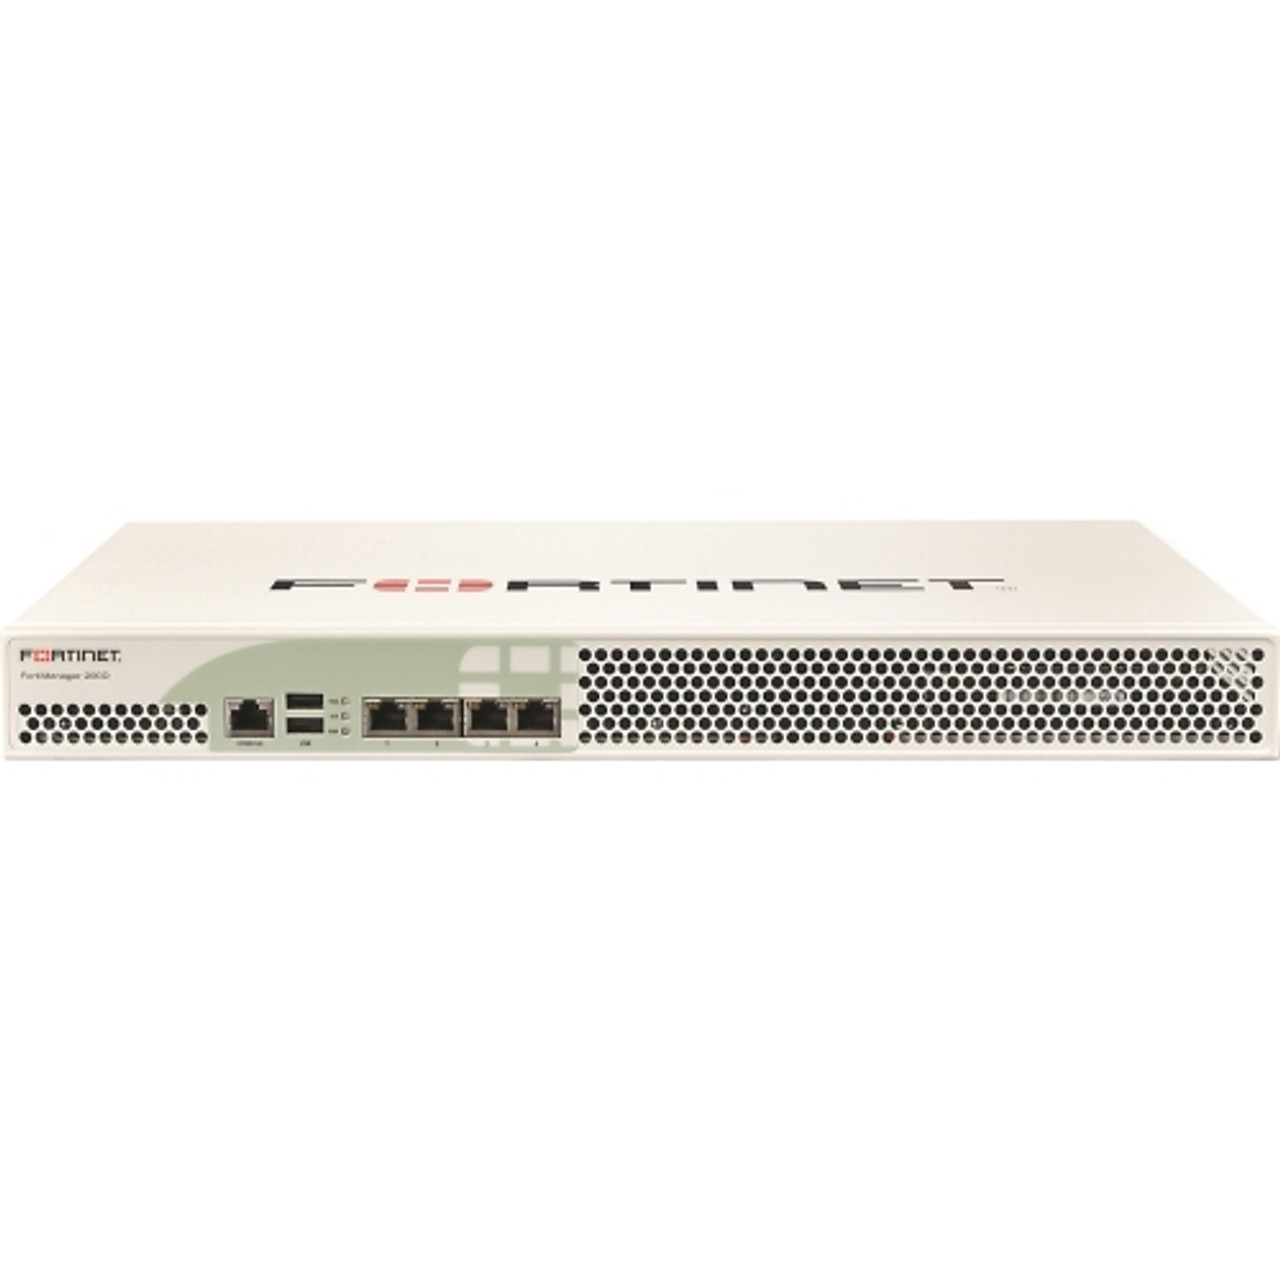 FMG-200D Fortinet Centralized Mgmt Appl 1tb Manages 30 Devices/Admin Domains